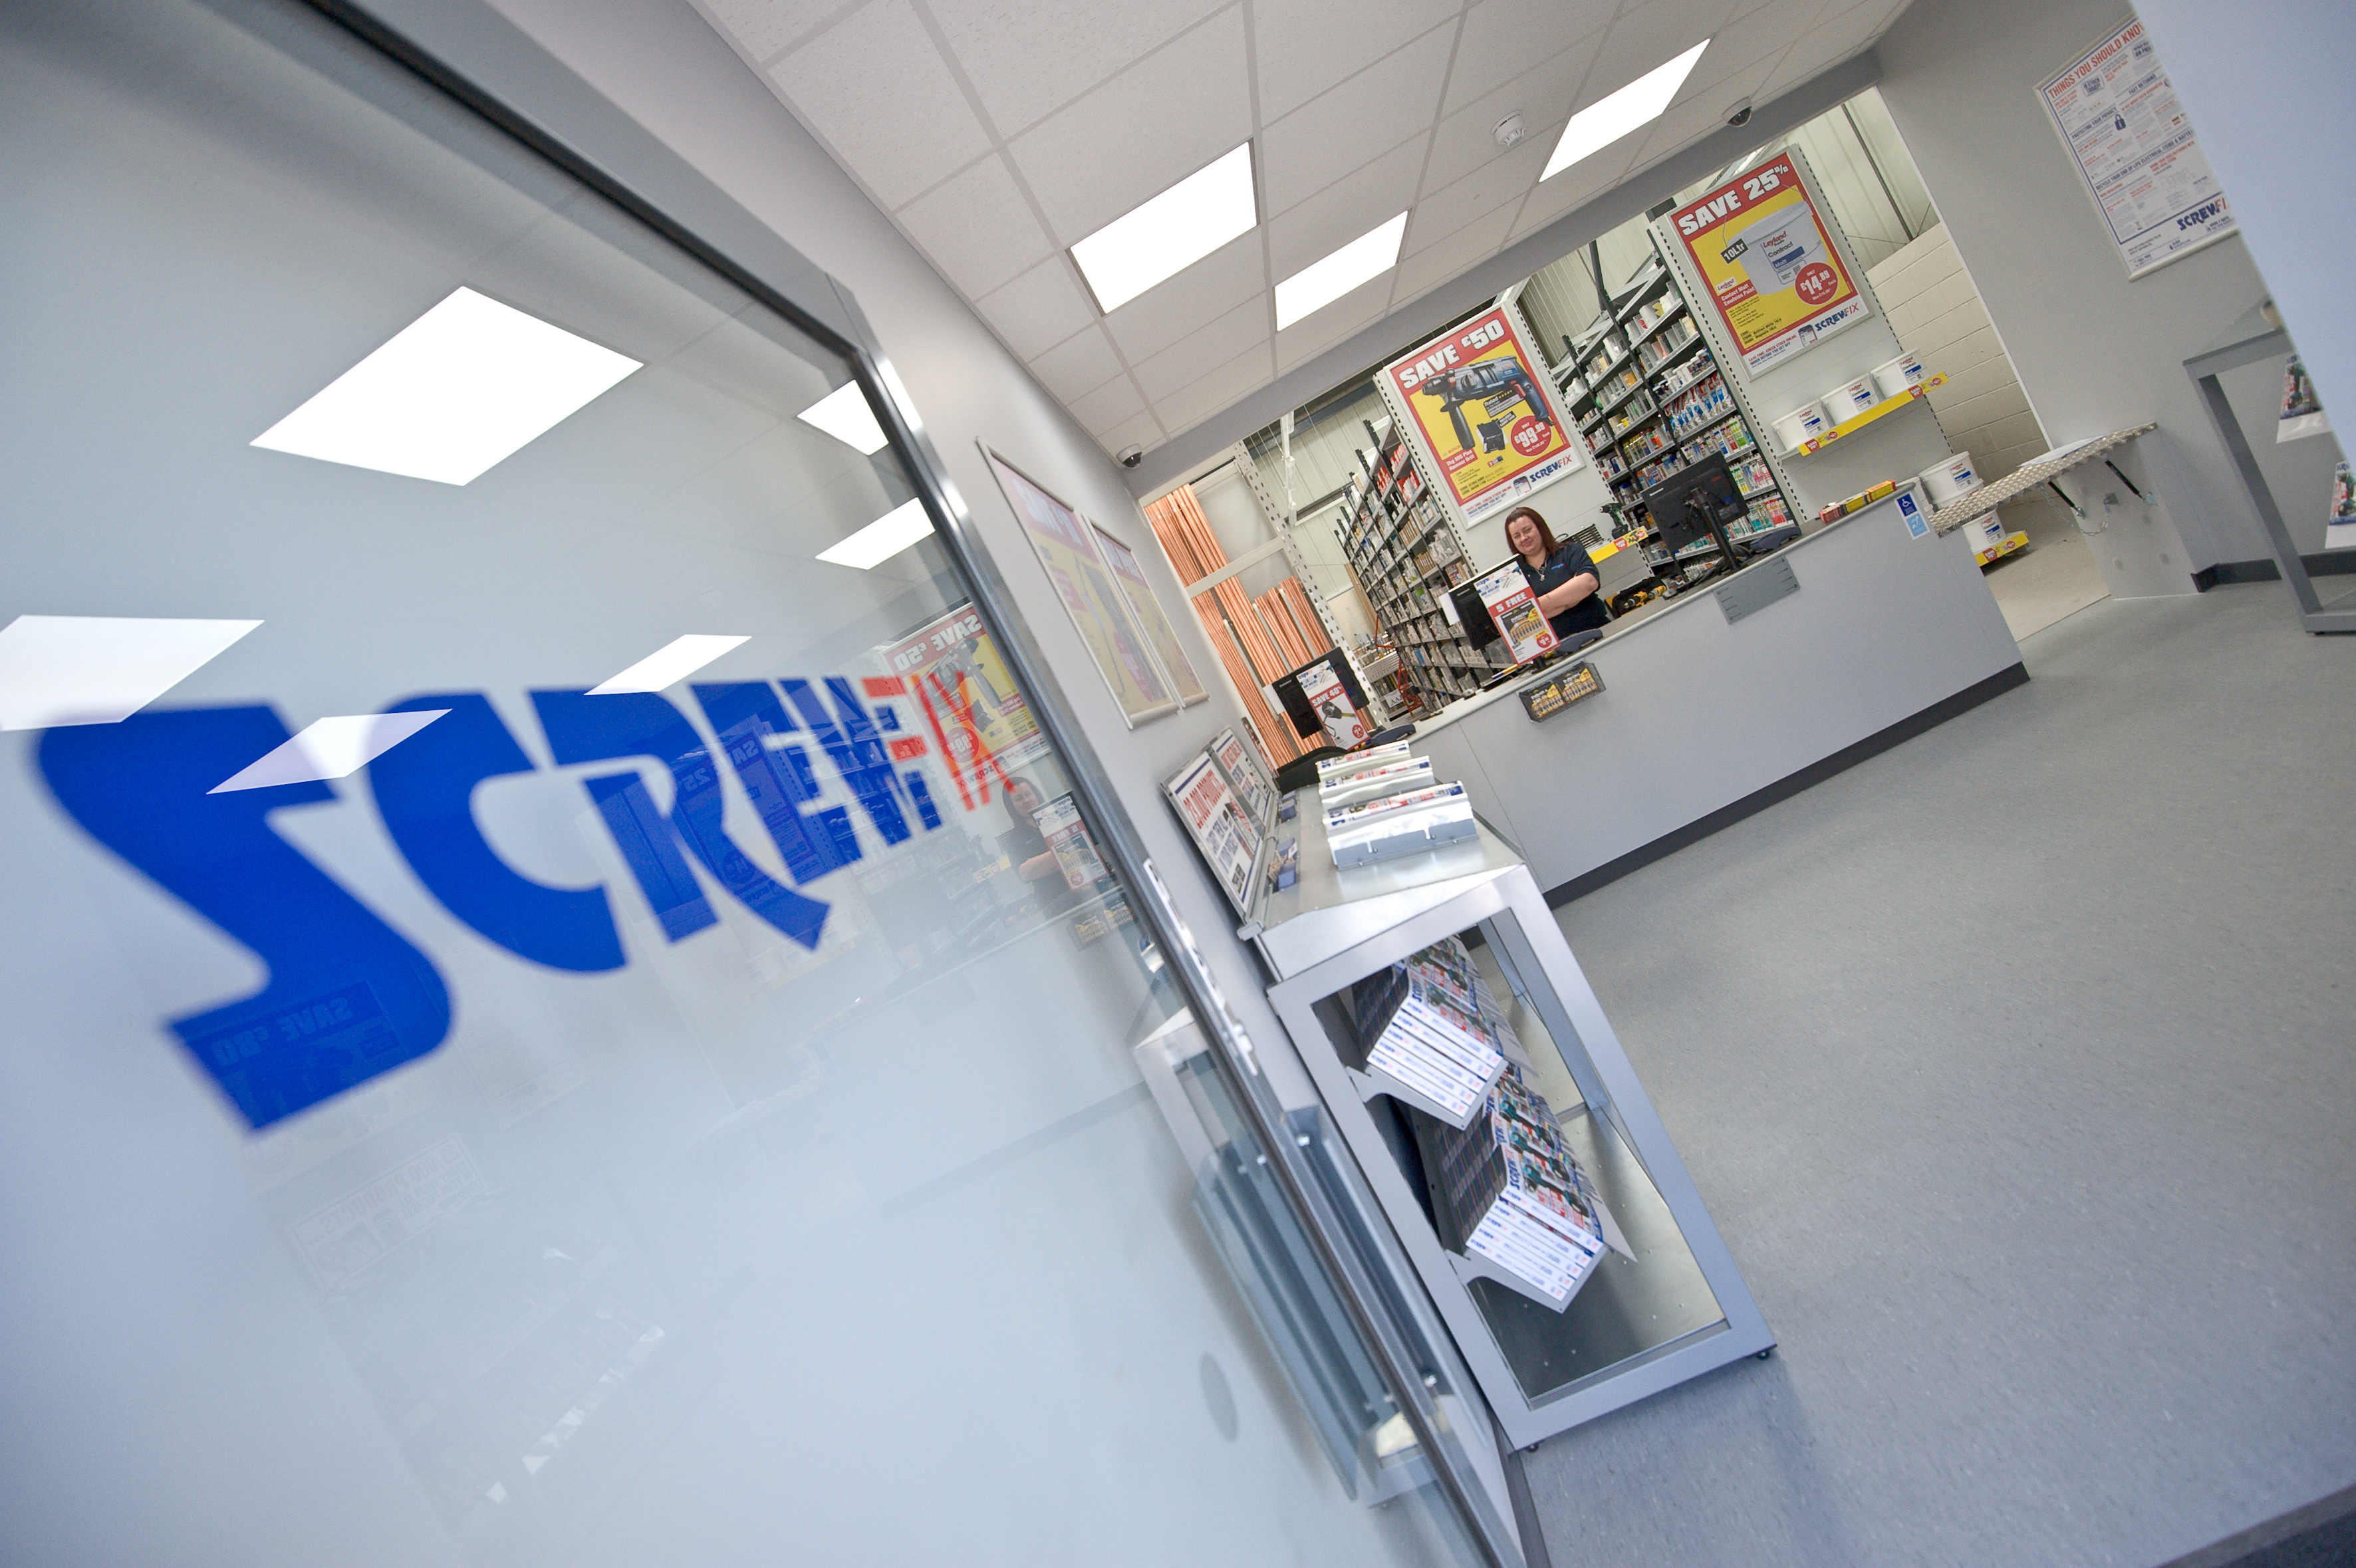 Screwfix Sales Up As Store Network Grows